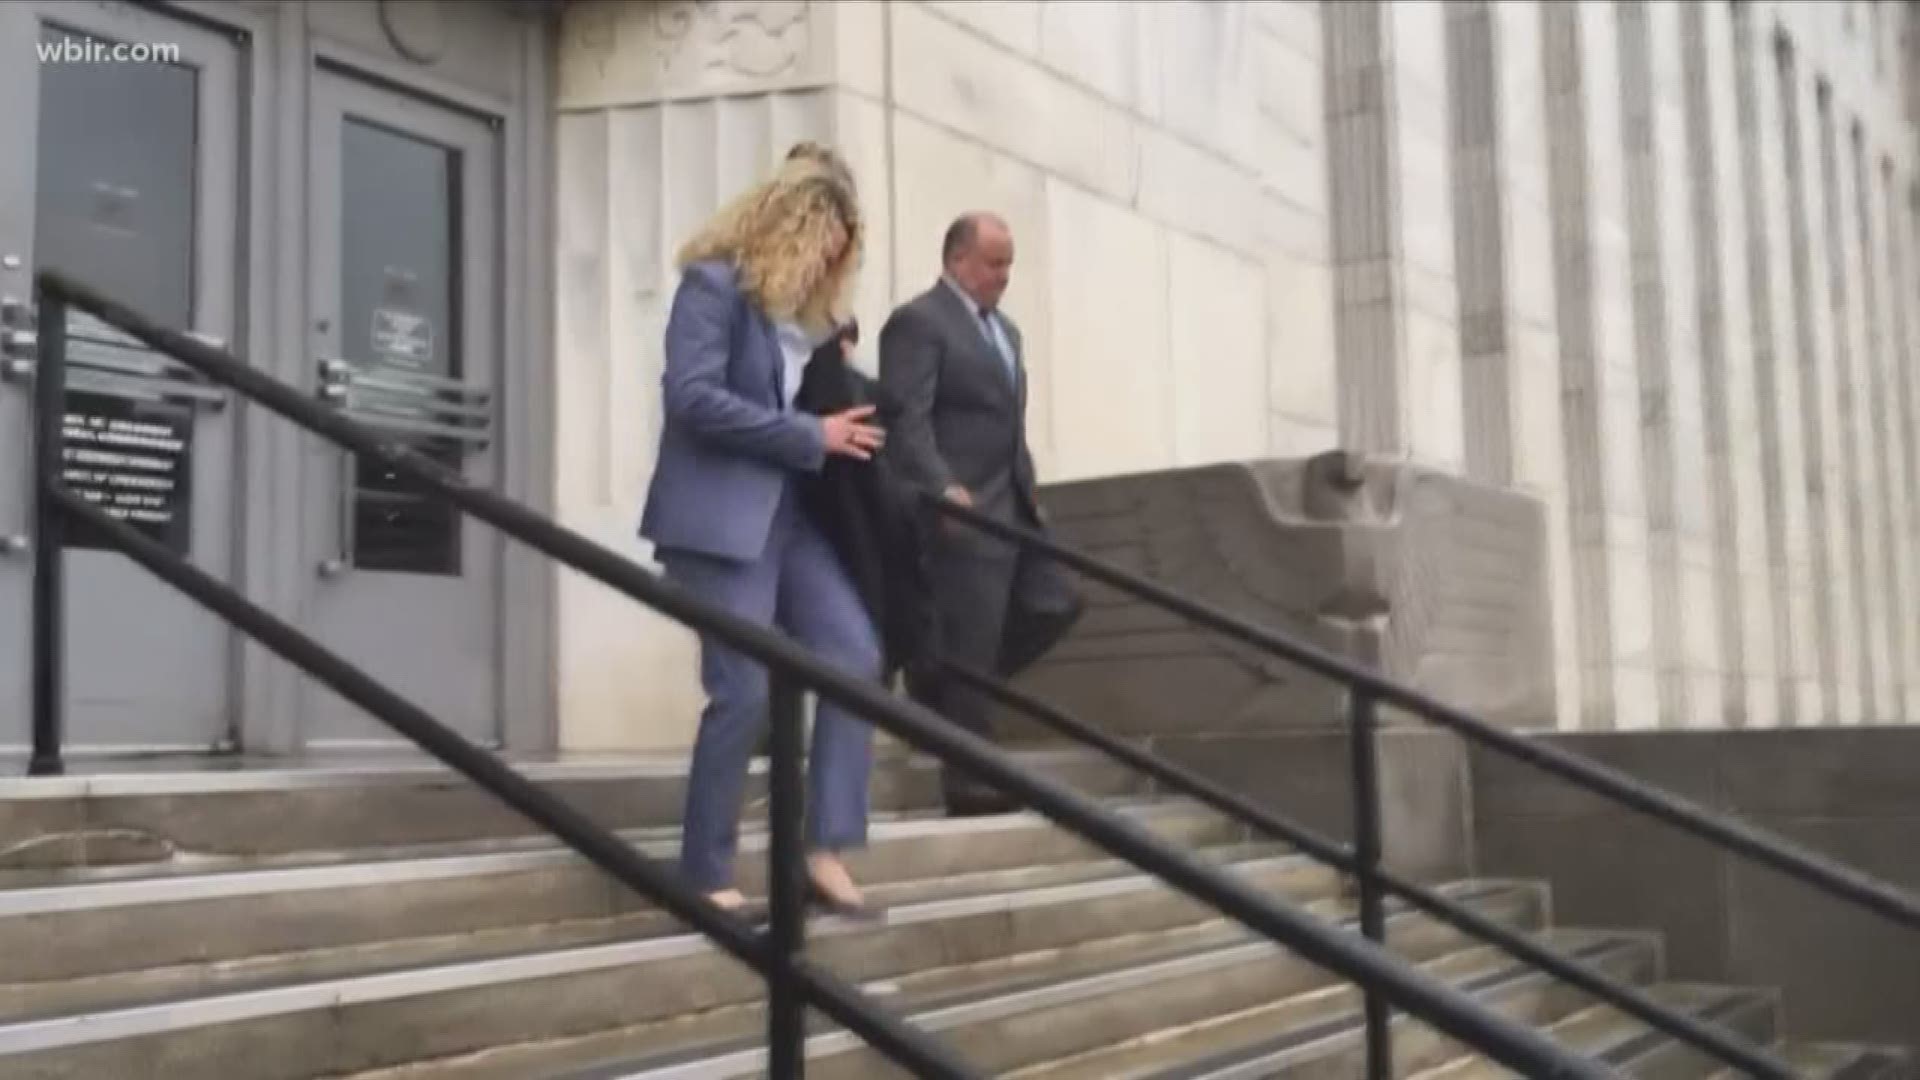 The Former president of Pilot Flying J is set to appeal his conviction. He is currently under house arrest.